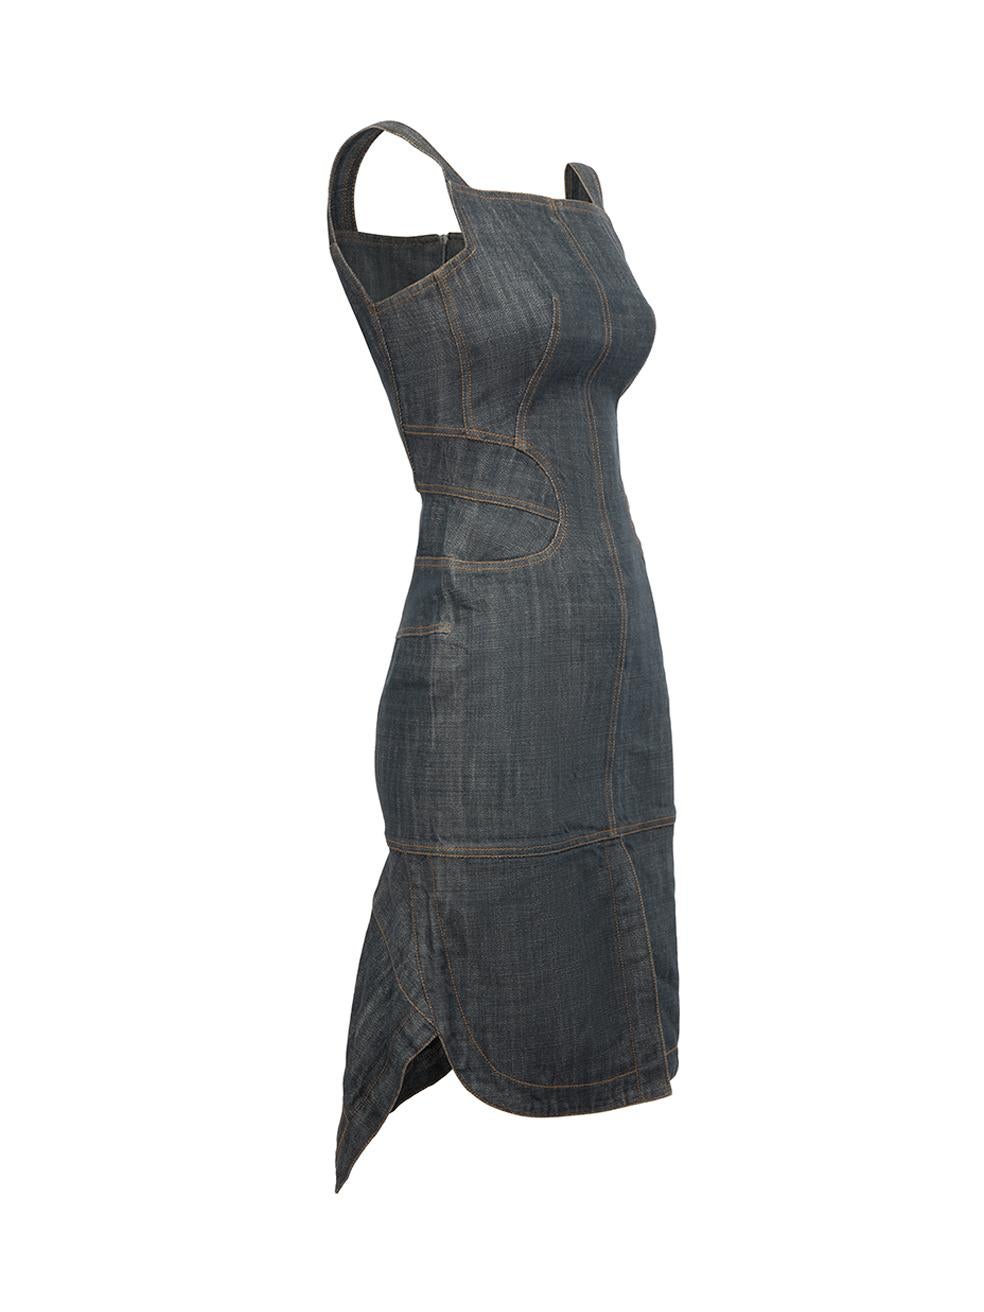 CONDITION is Very good. Minimal wear to dress is evident. Minimal wear to the back seam at the zip which has become undone on this used Alaïa designer resale item.



Details


Blue

Pinafore dress

Denim

Knee length

Sleeveless

Back zip